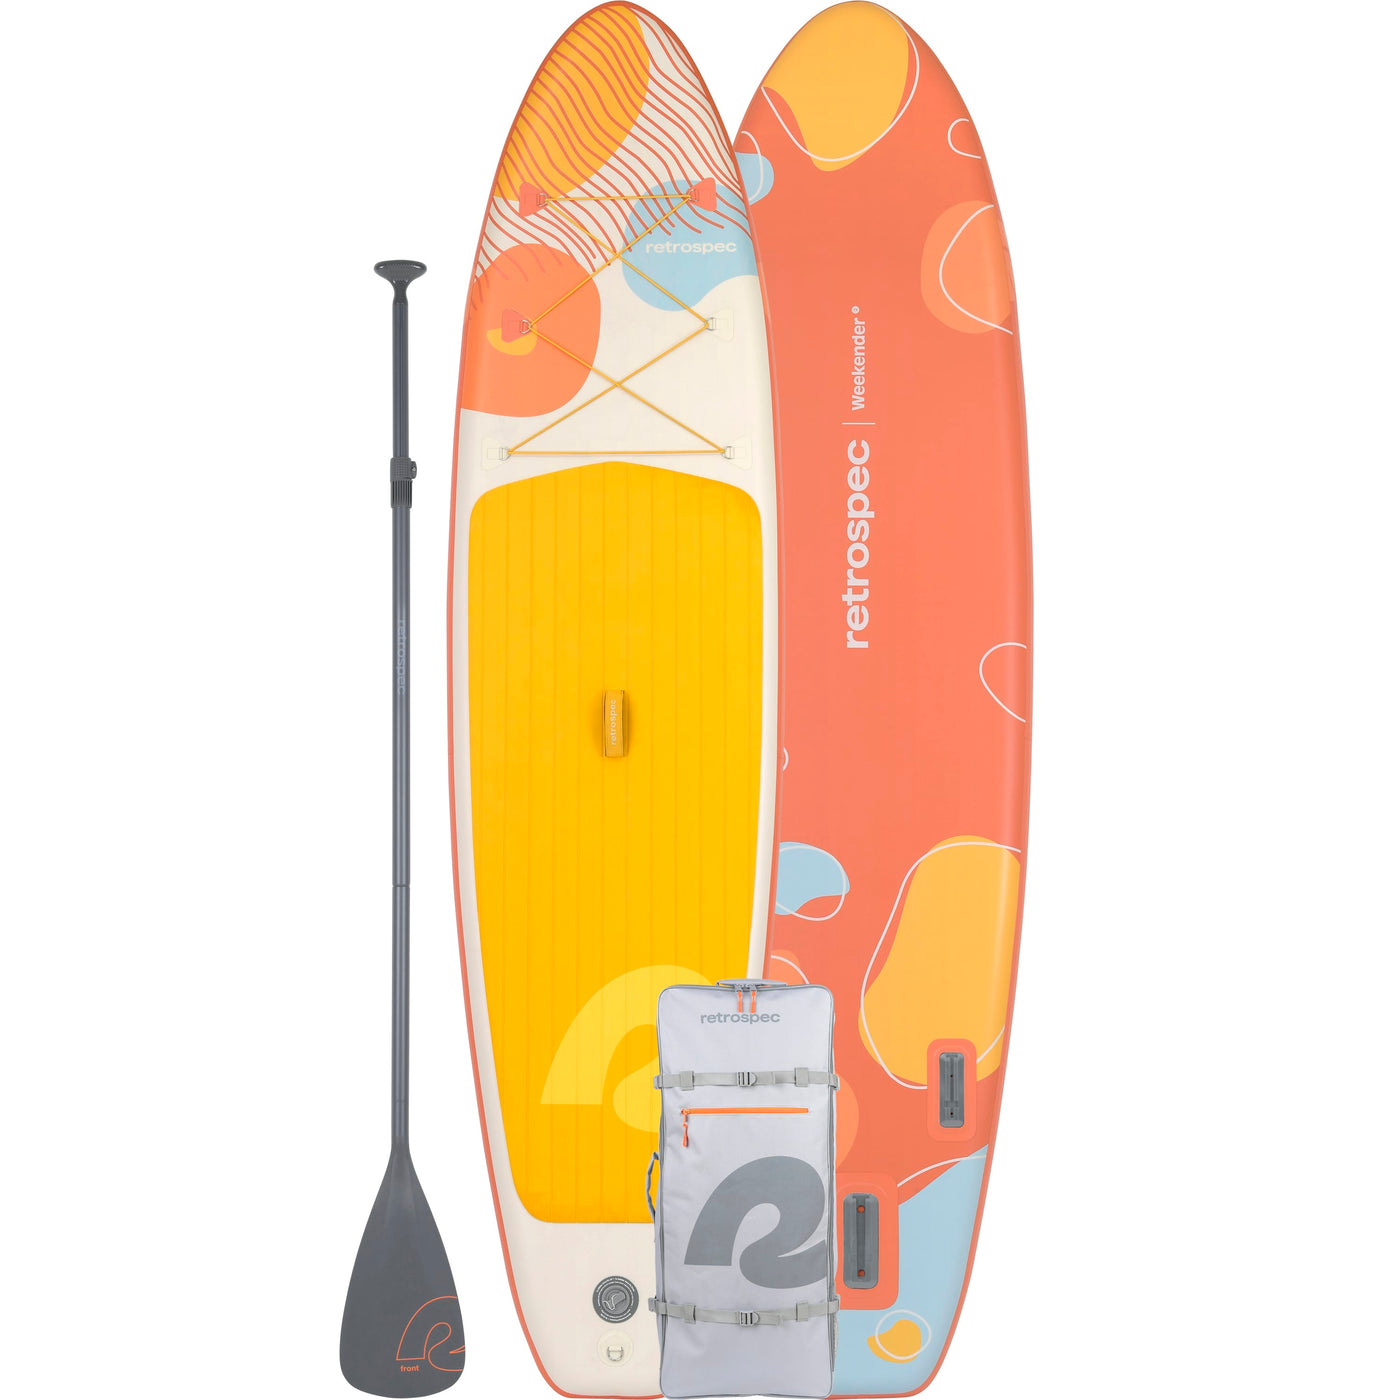 Weekender 2 Inflatable Stand Up Paddle Board 10’6” | Coral Foam